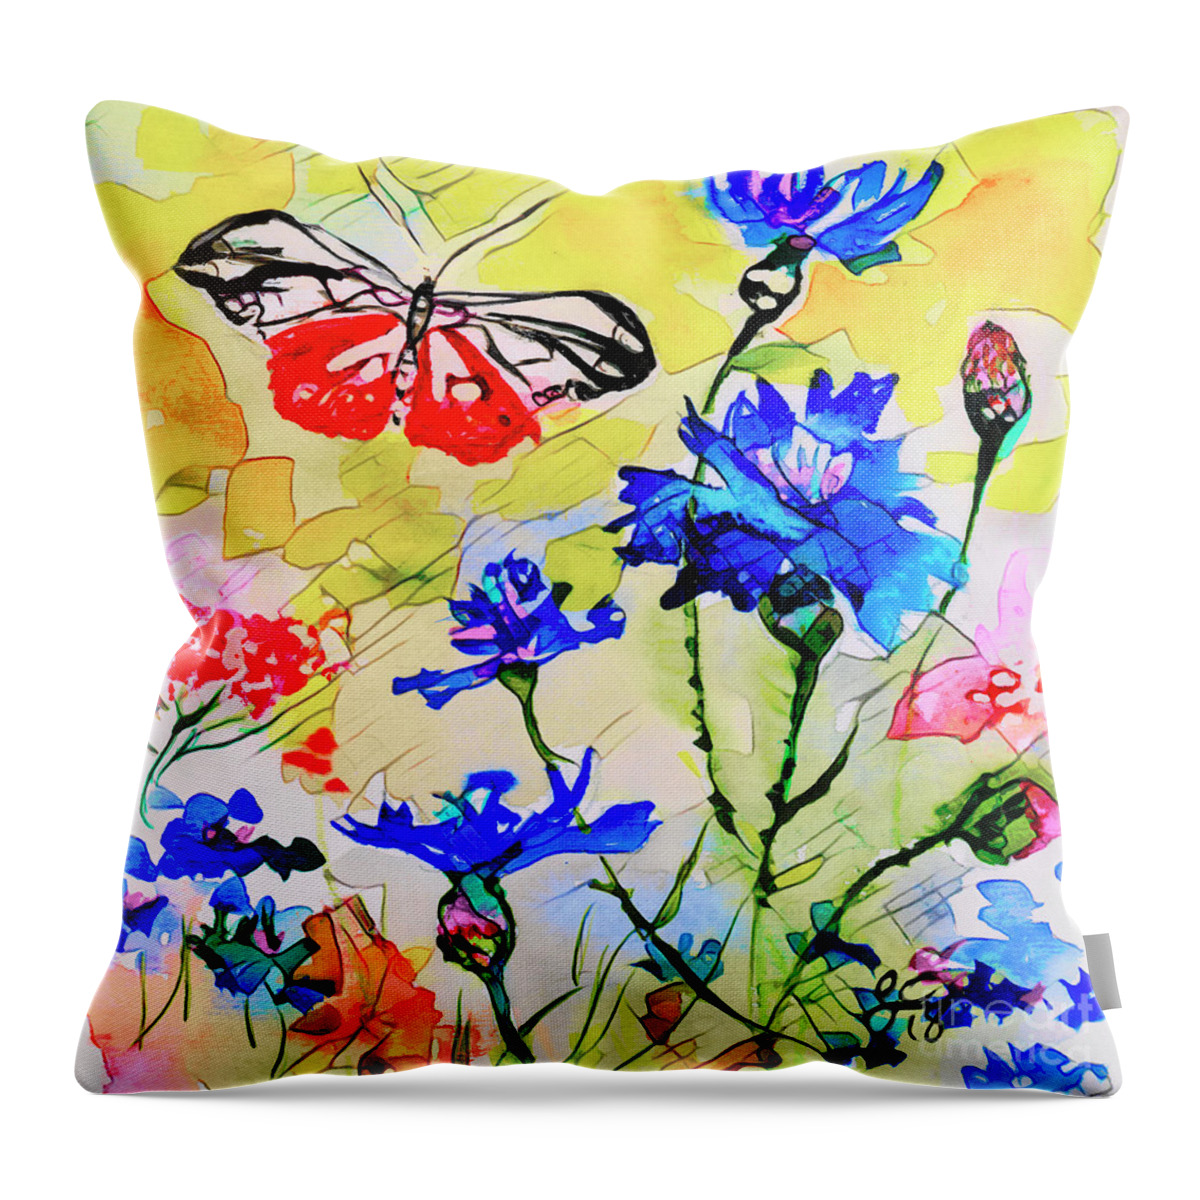 Cornflowers Throw Pillow featuring the mixed media Modern Floral Art Butterfly Cornflowers by Ginette Callaway